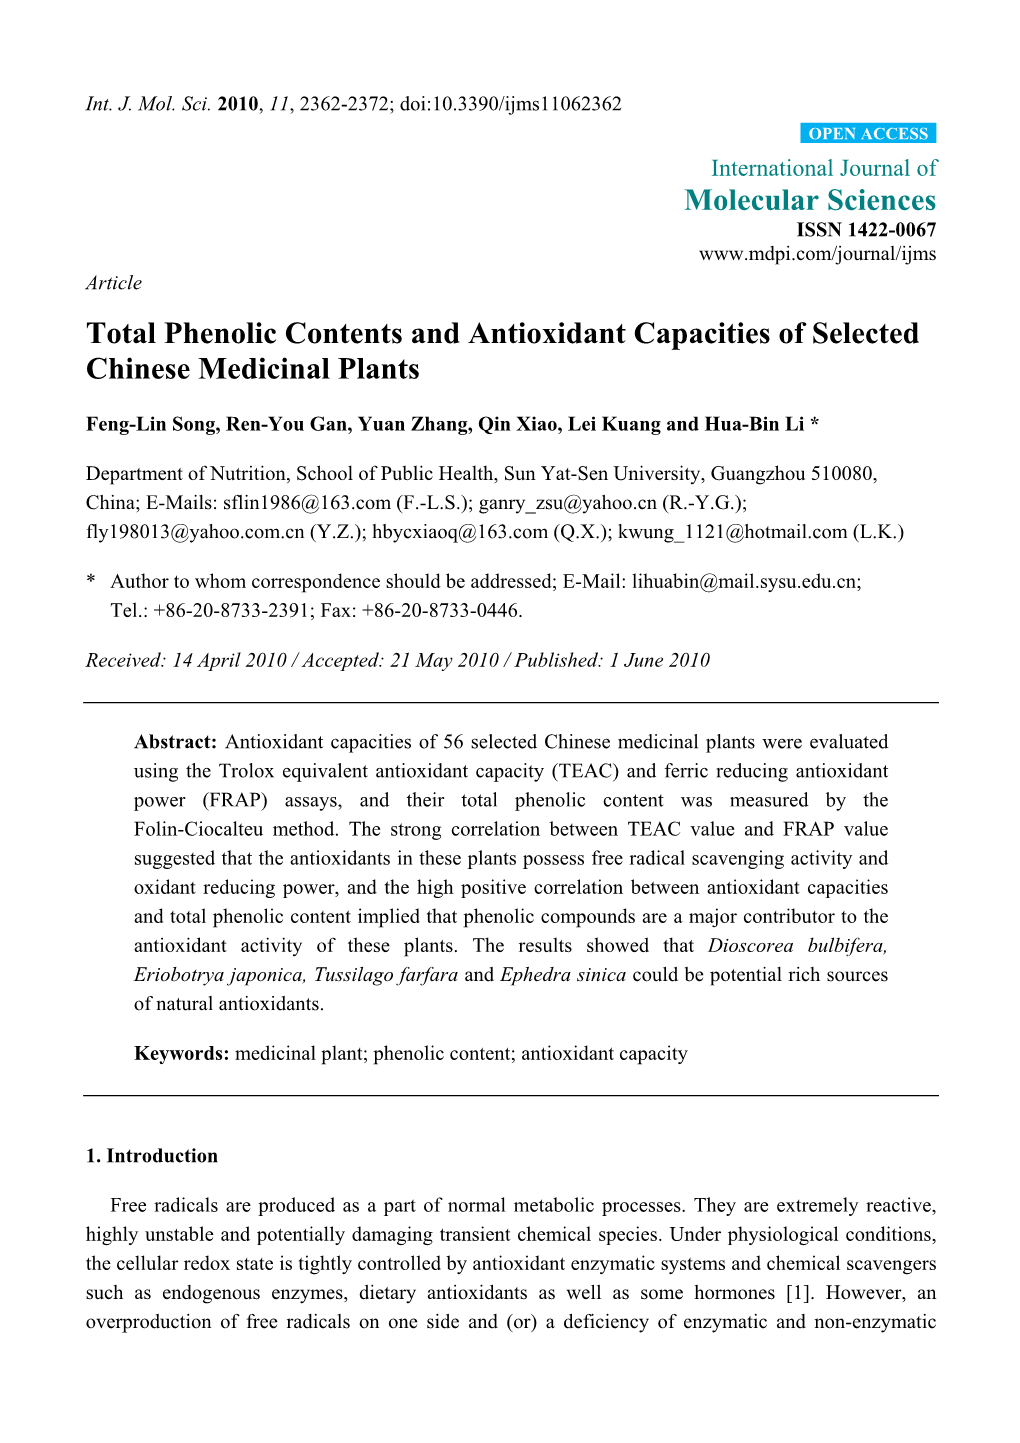 Total Phenolic Contents and Antioxidant Capacities of Selected Chinese Medicinal Plants